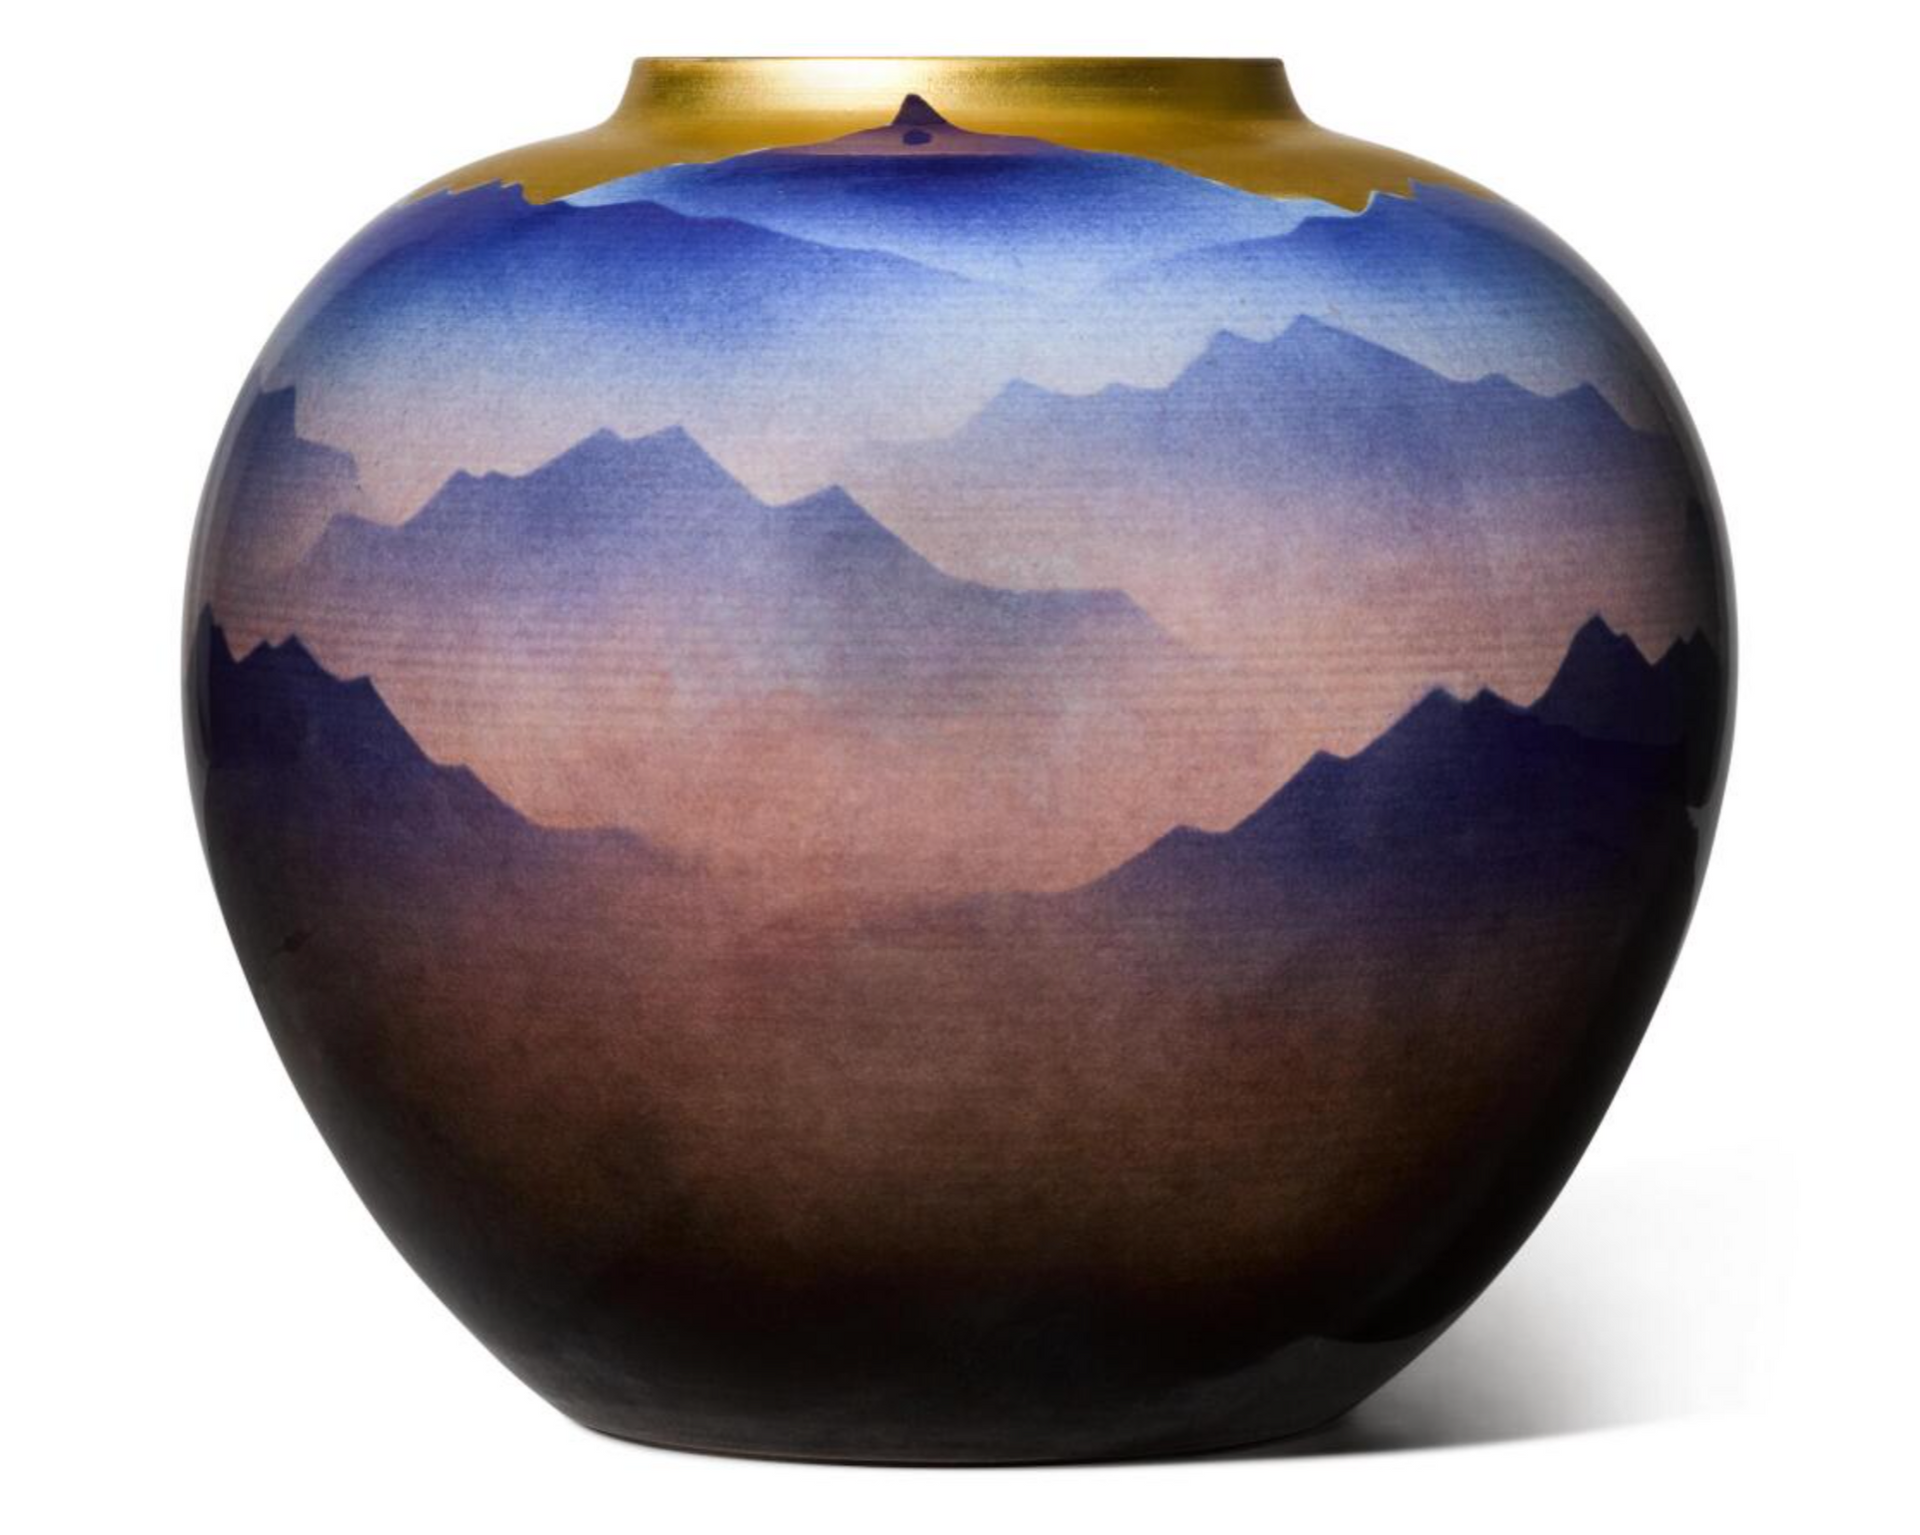 Round-shaped vase, decorated in various shades of blue and purple, showing mountains in mist. The shoulder is applied with gold depicting a sunrise.